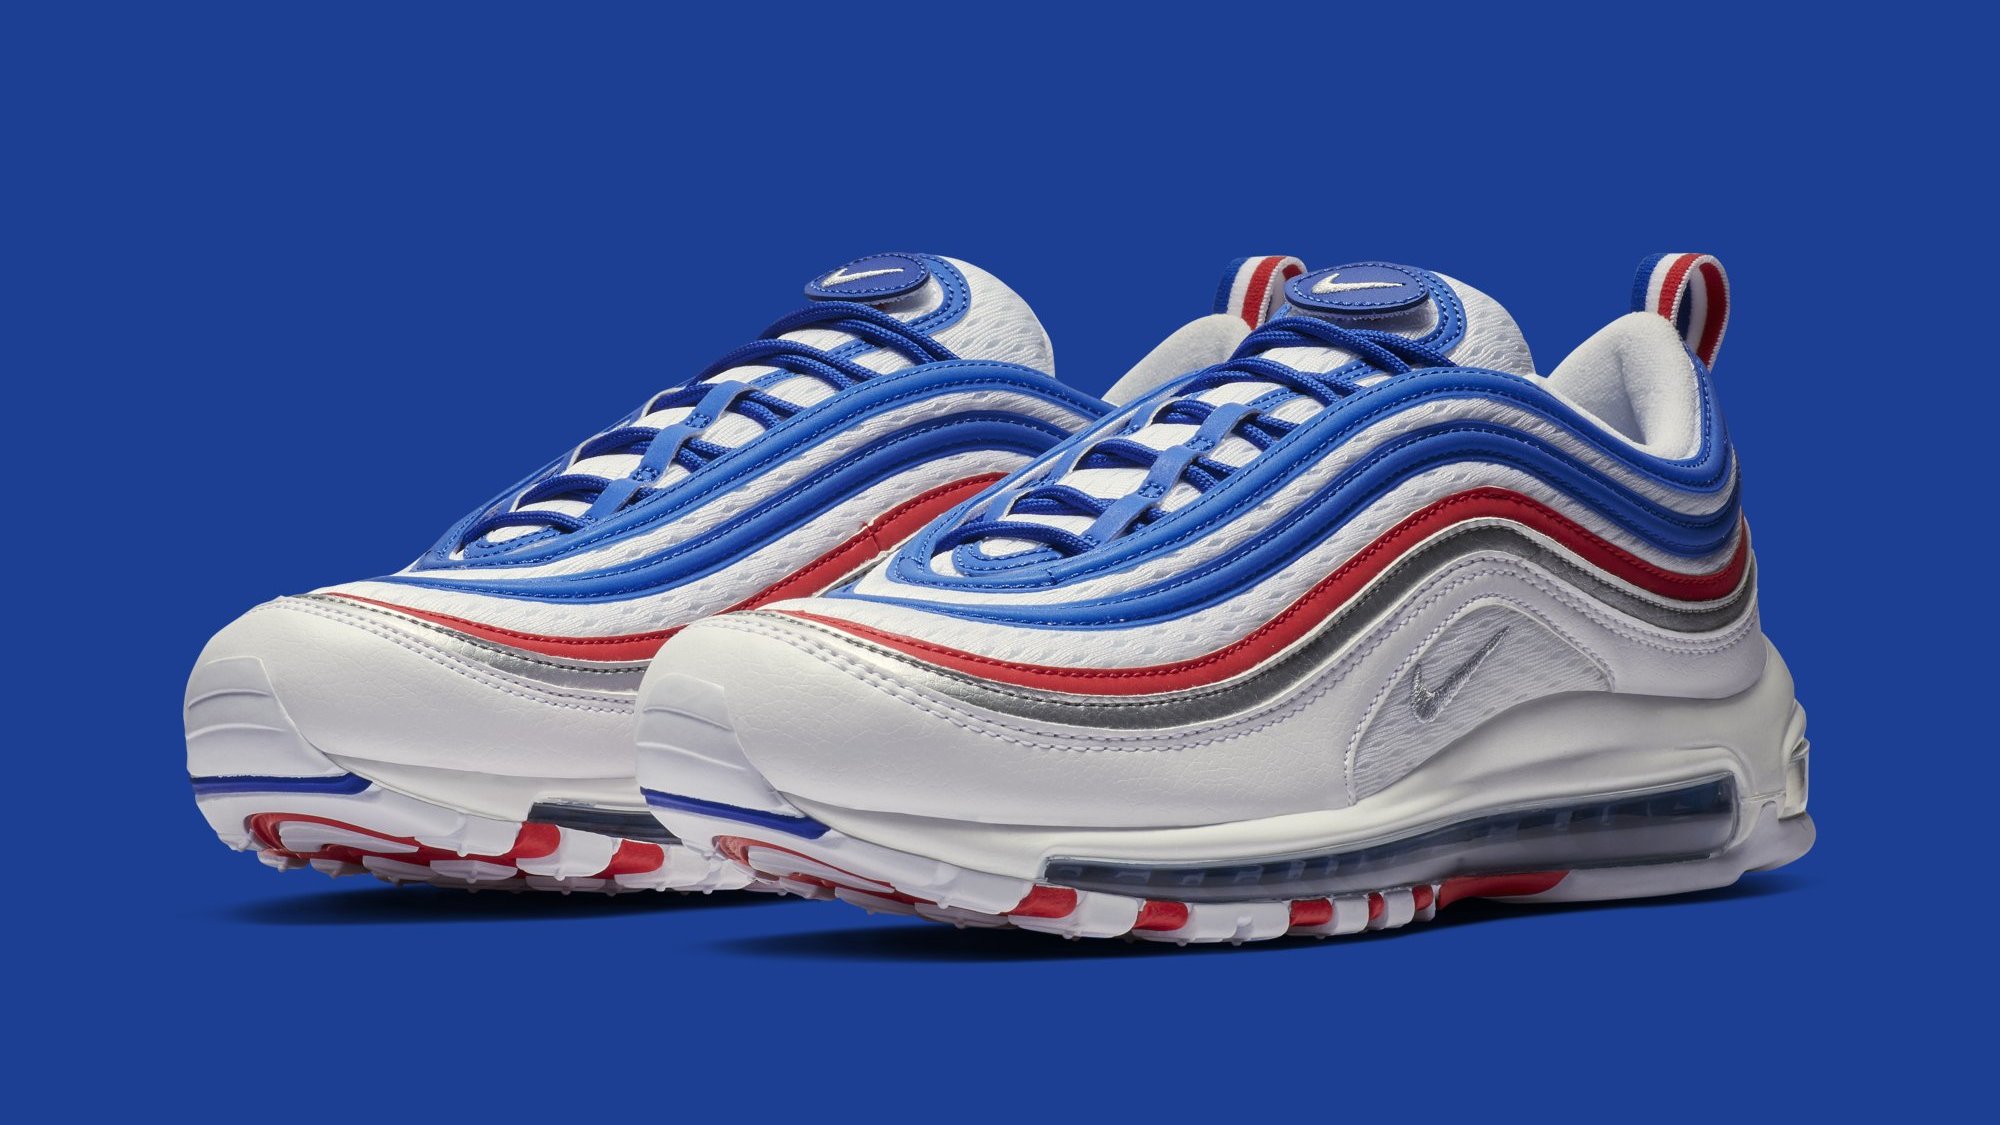 Nike Air Max 97 'Game Royal/Metallic Silver-White' 921826-404 Release Date  | Sole Collector